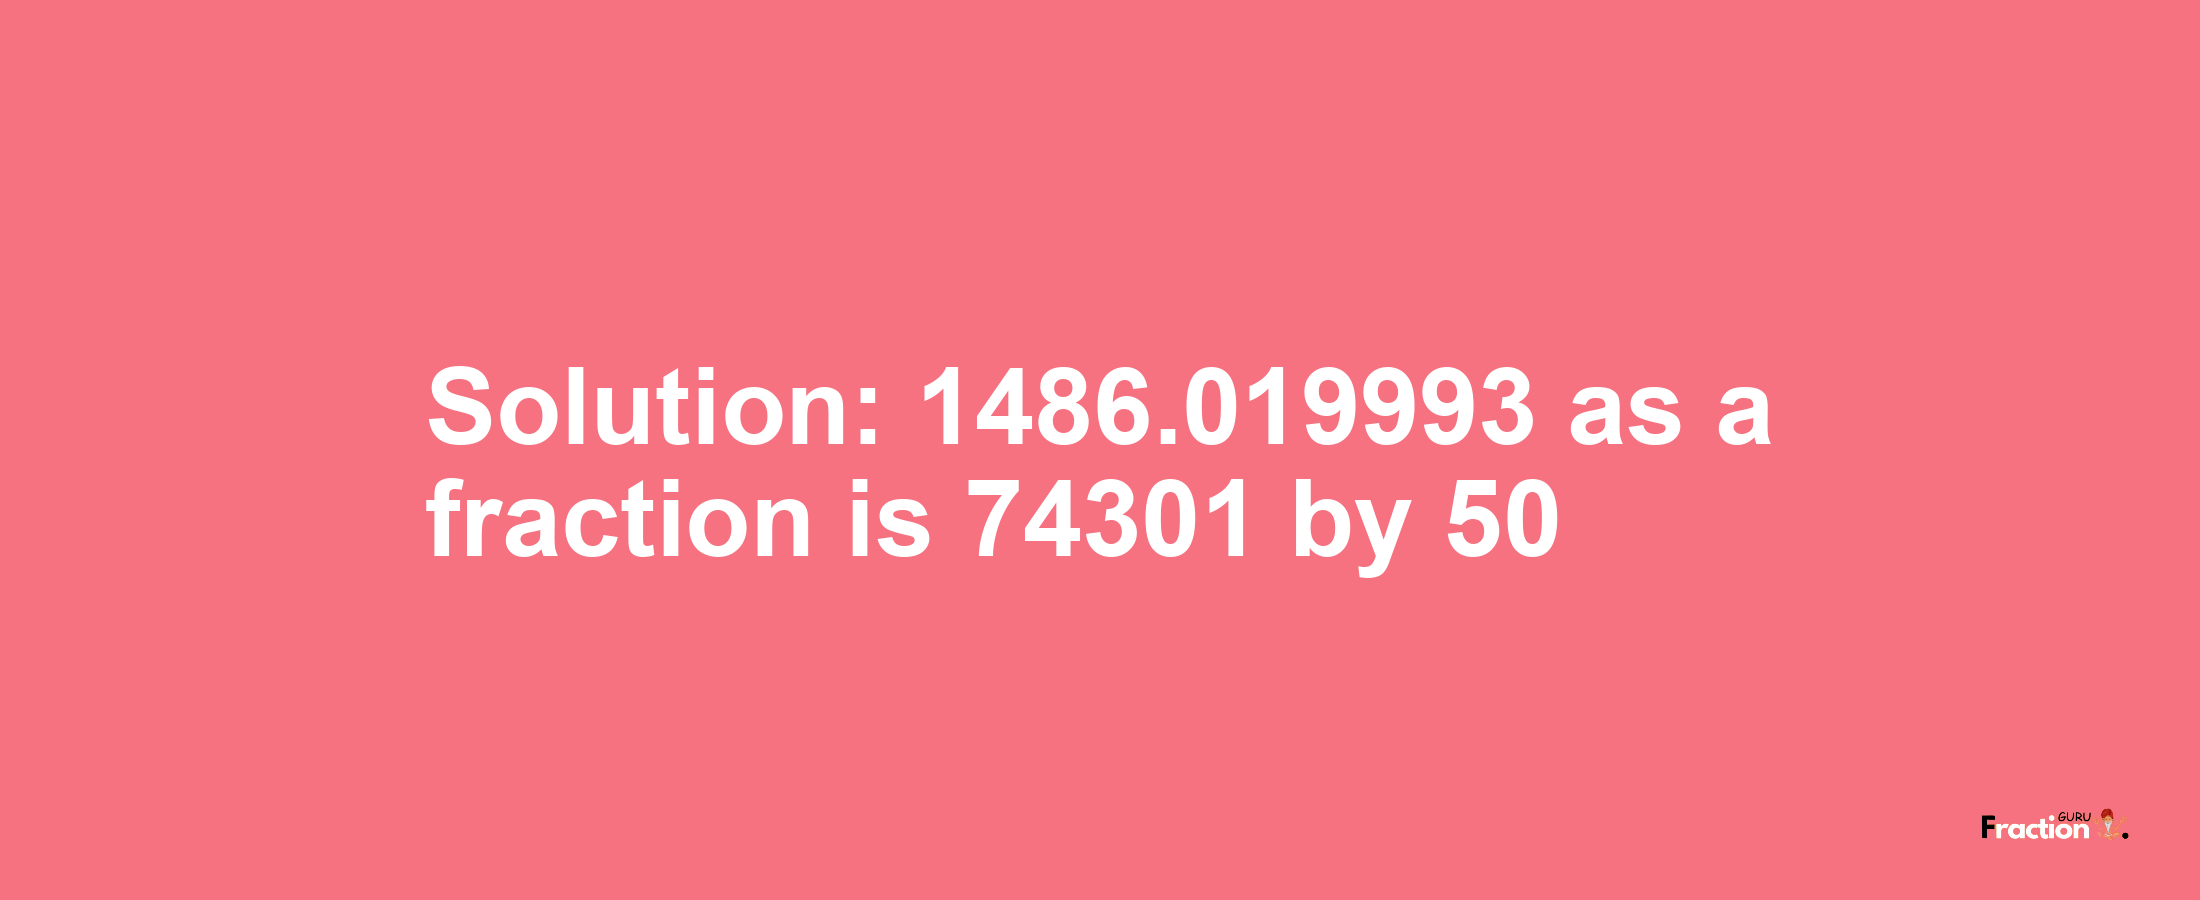 Solution:1486.019993 as a fraction is 74301/50